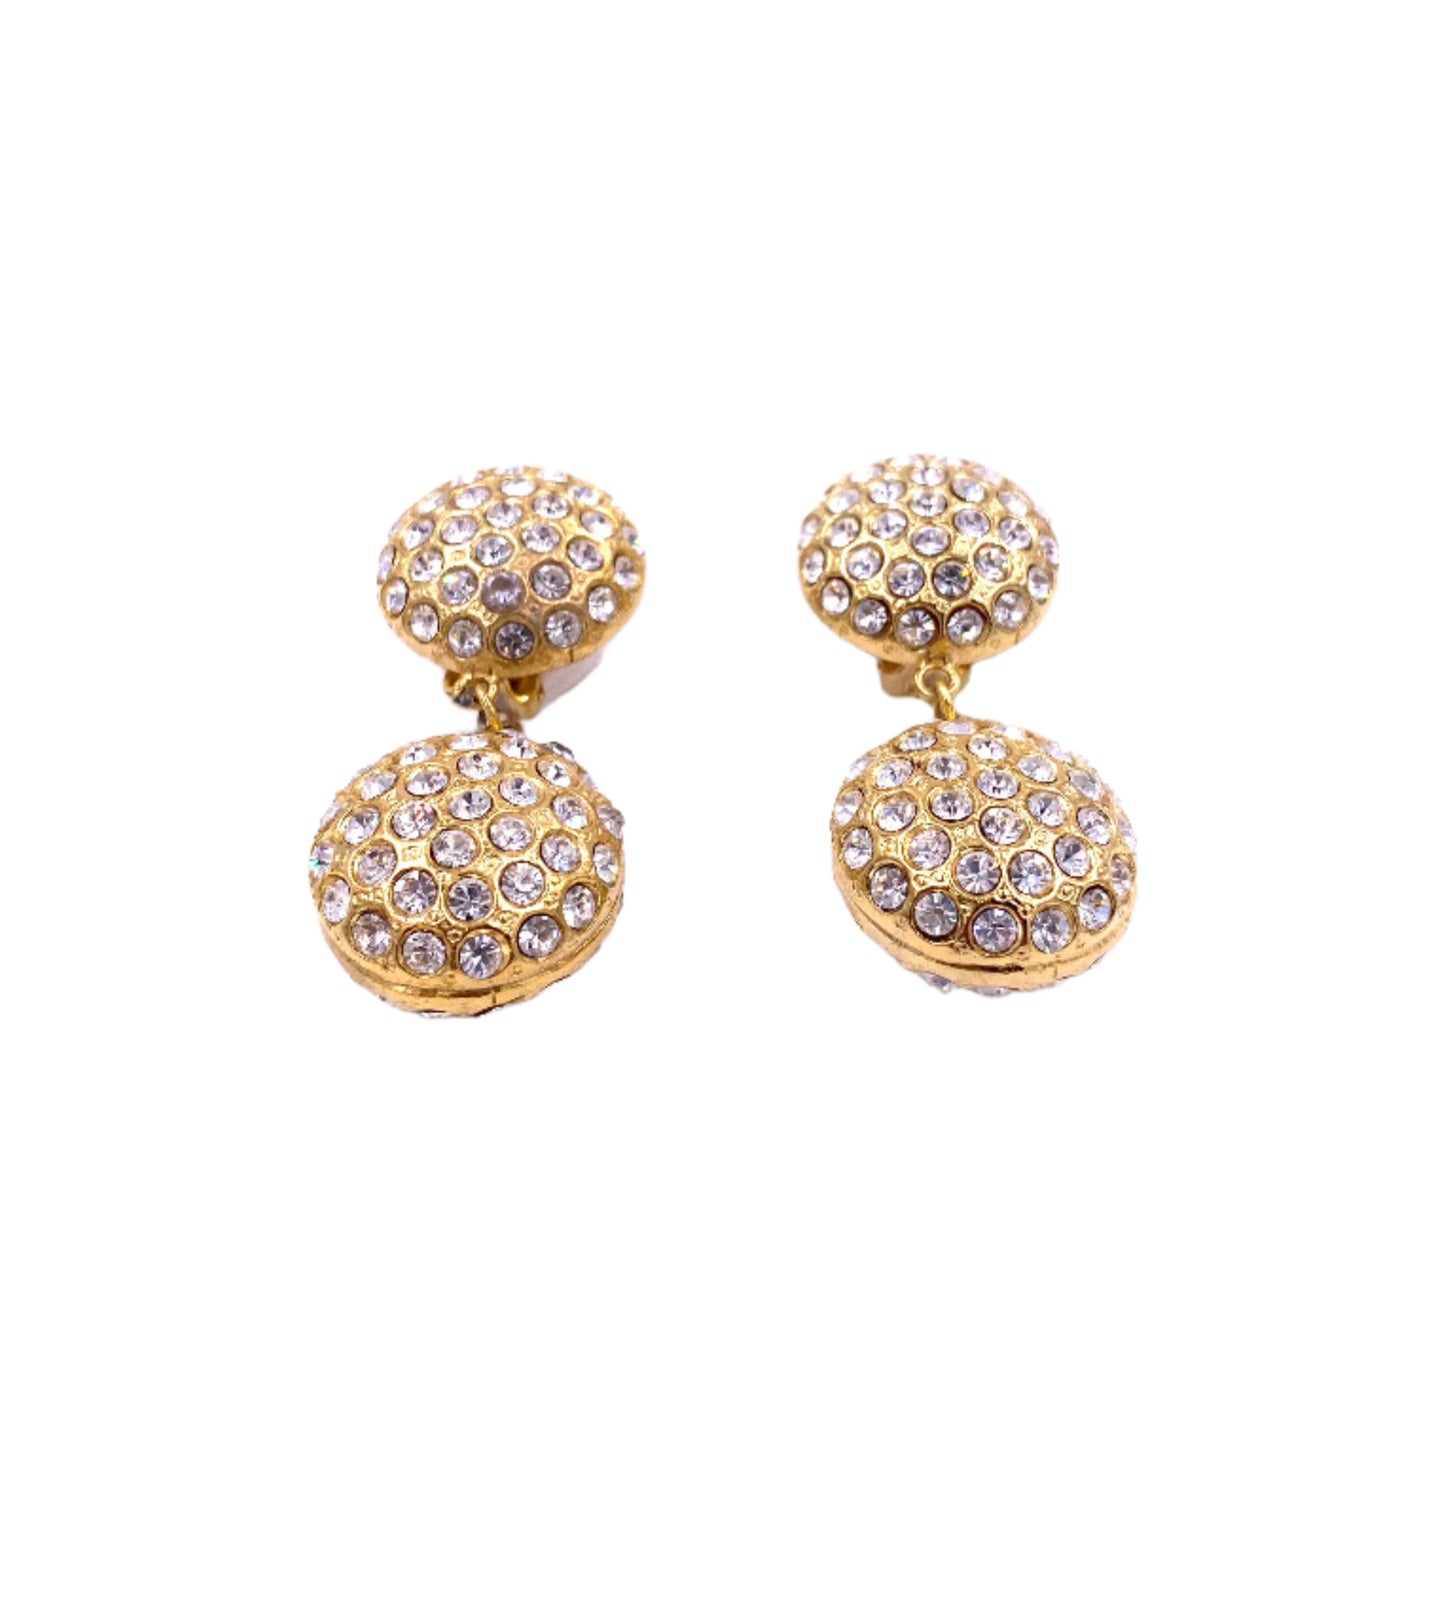 Vintage Circle Double Drop Clip-On Earrings